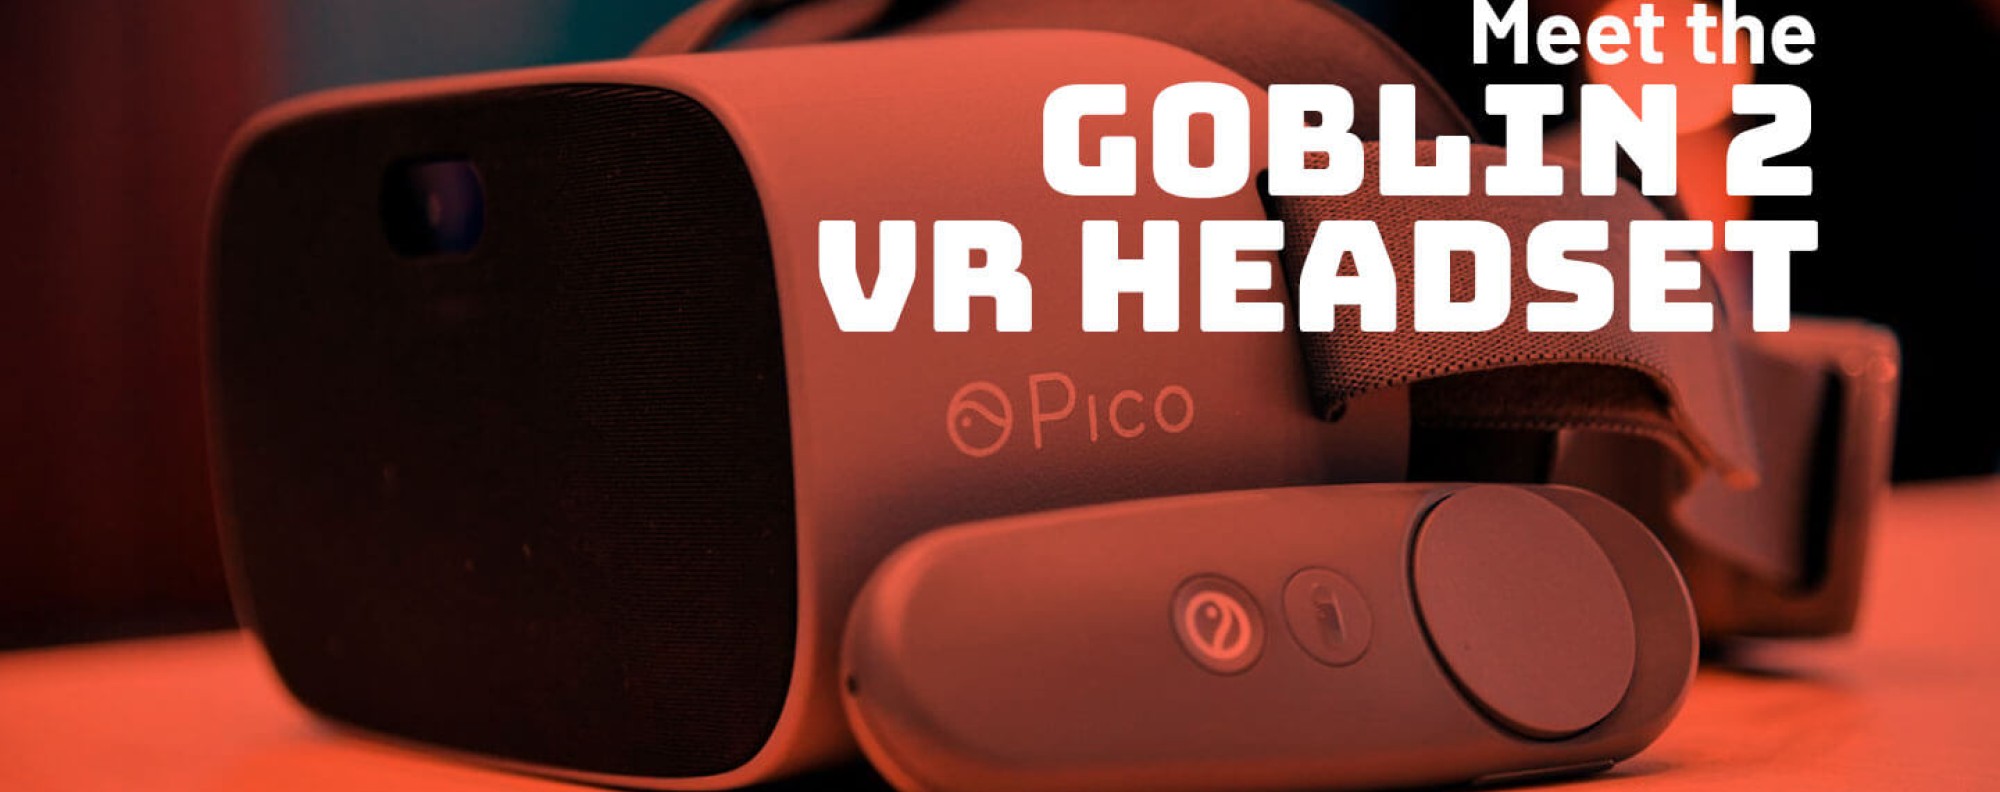 Pico Goblin Interactive VR Android 32GB www.krzysztofbialy.com